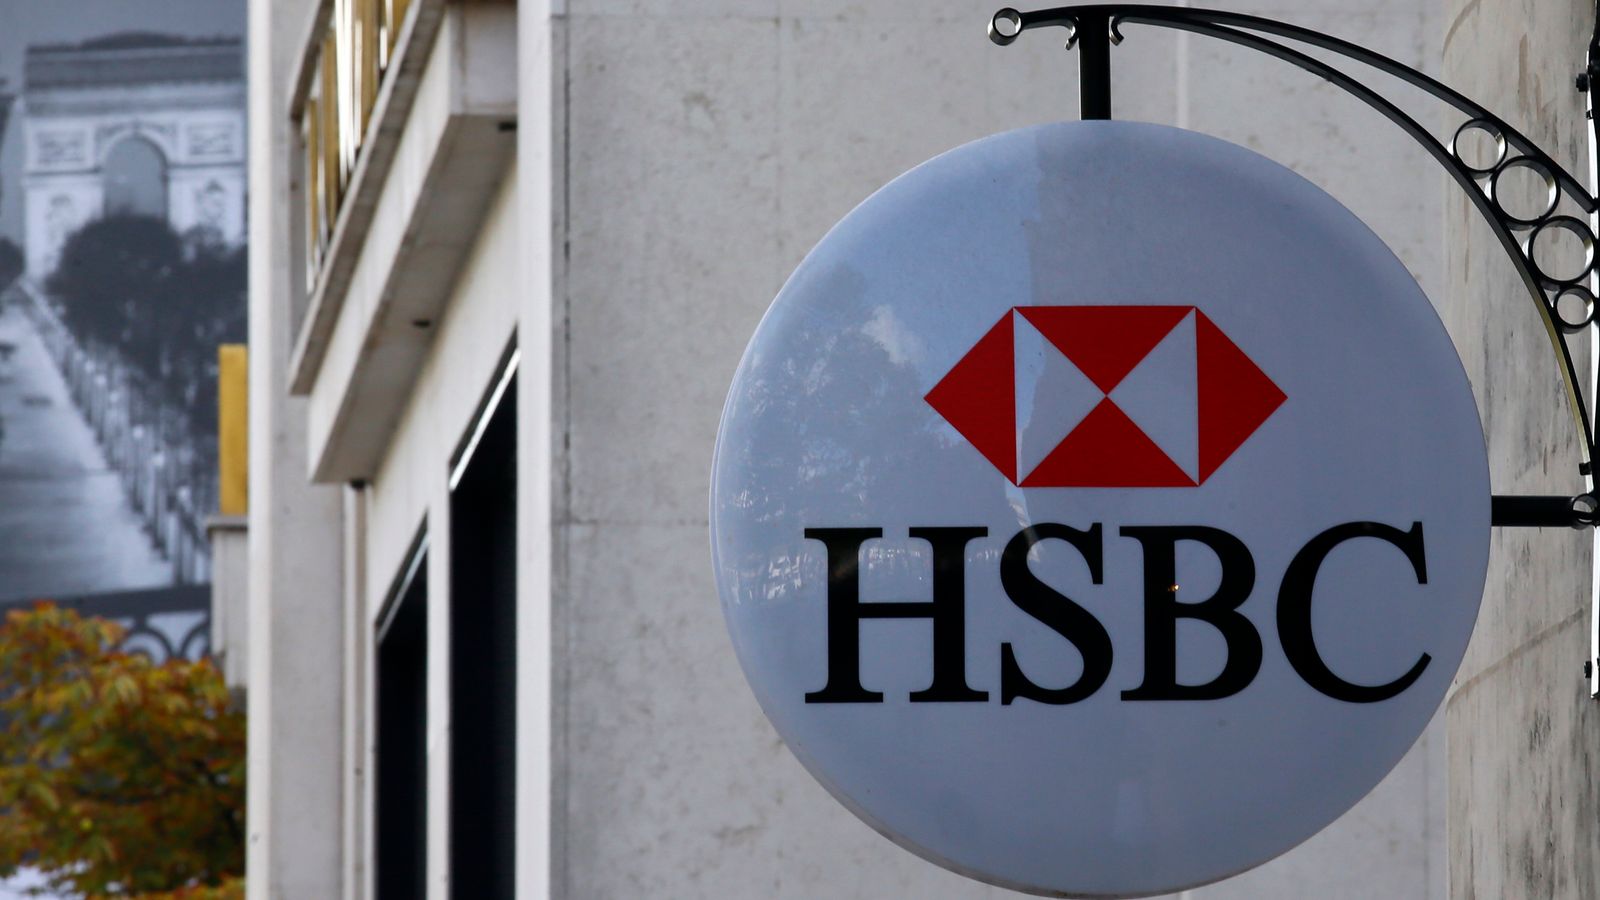 HSBC to shut dozens more sites - full list of bank branches closing